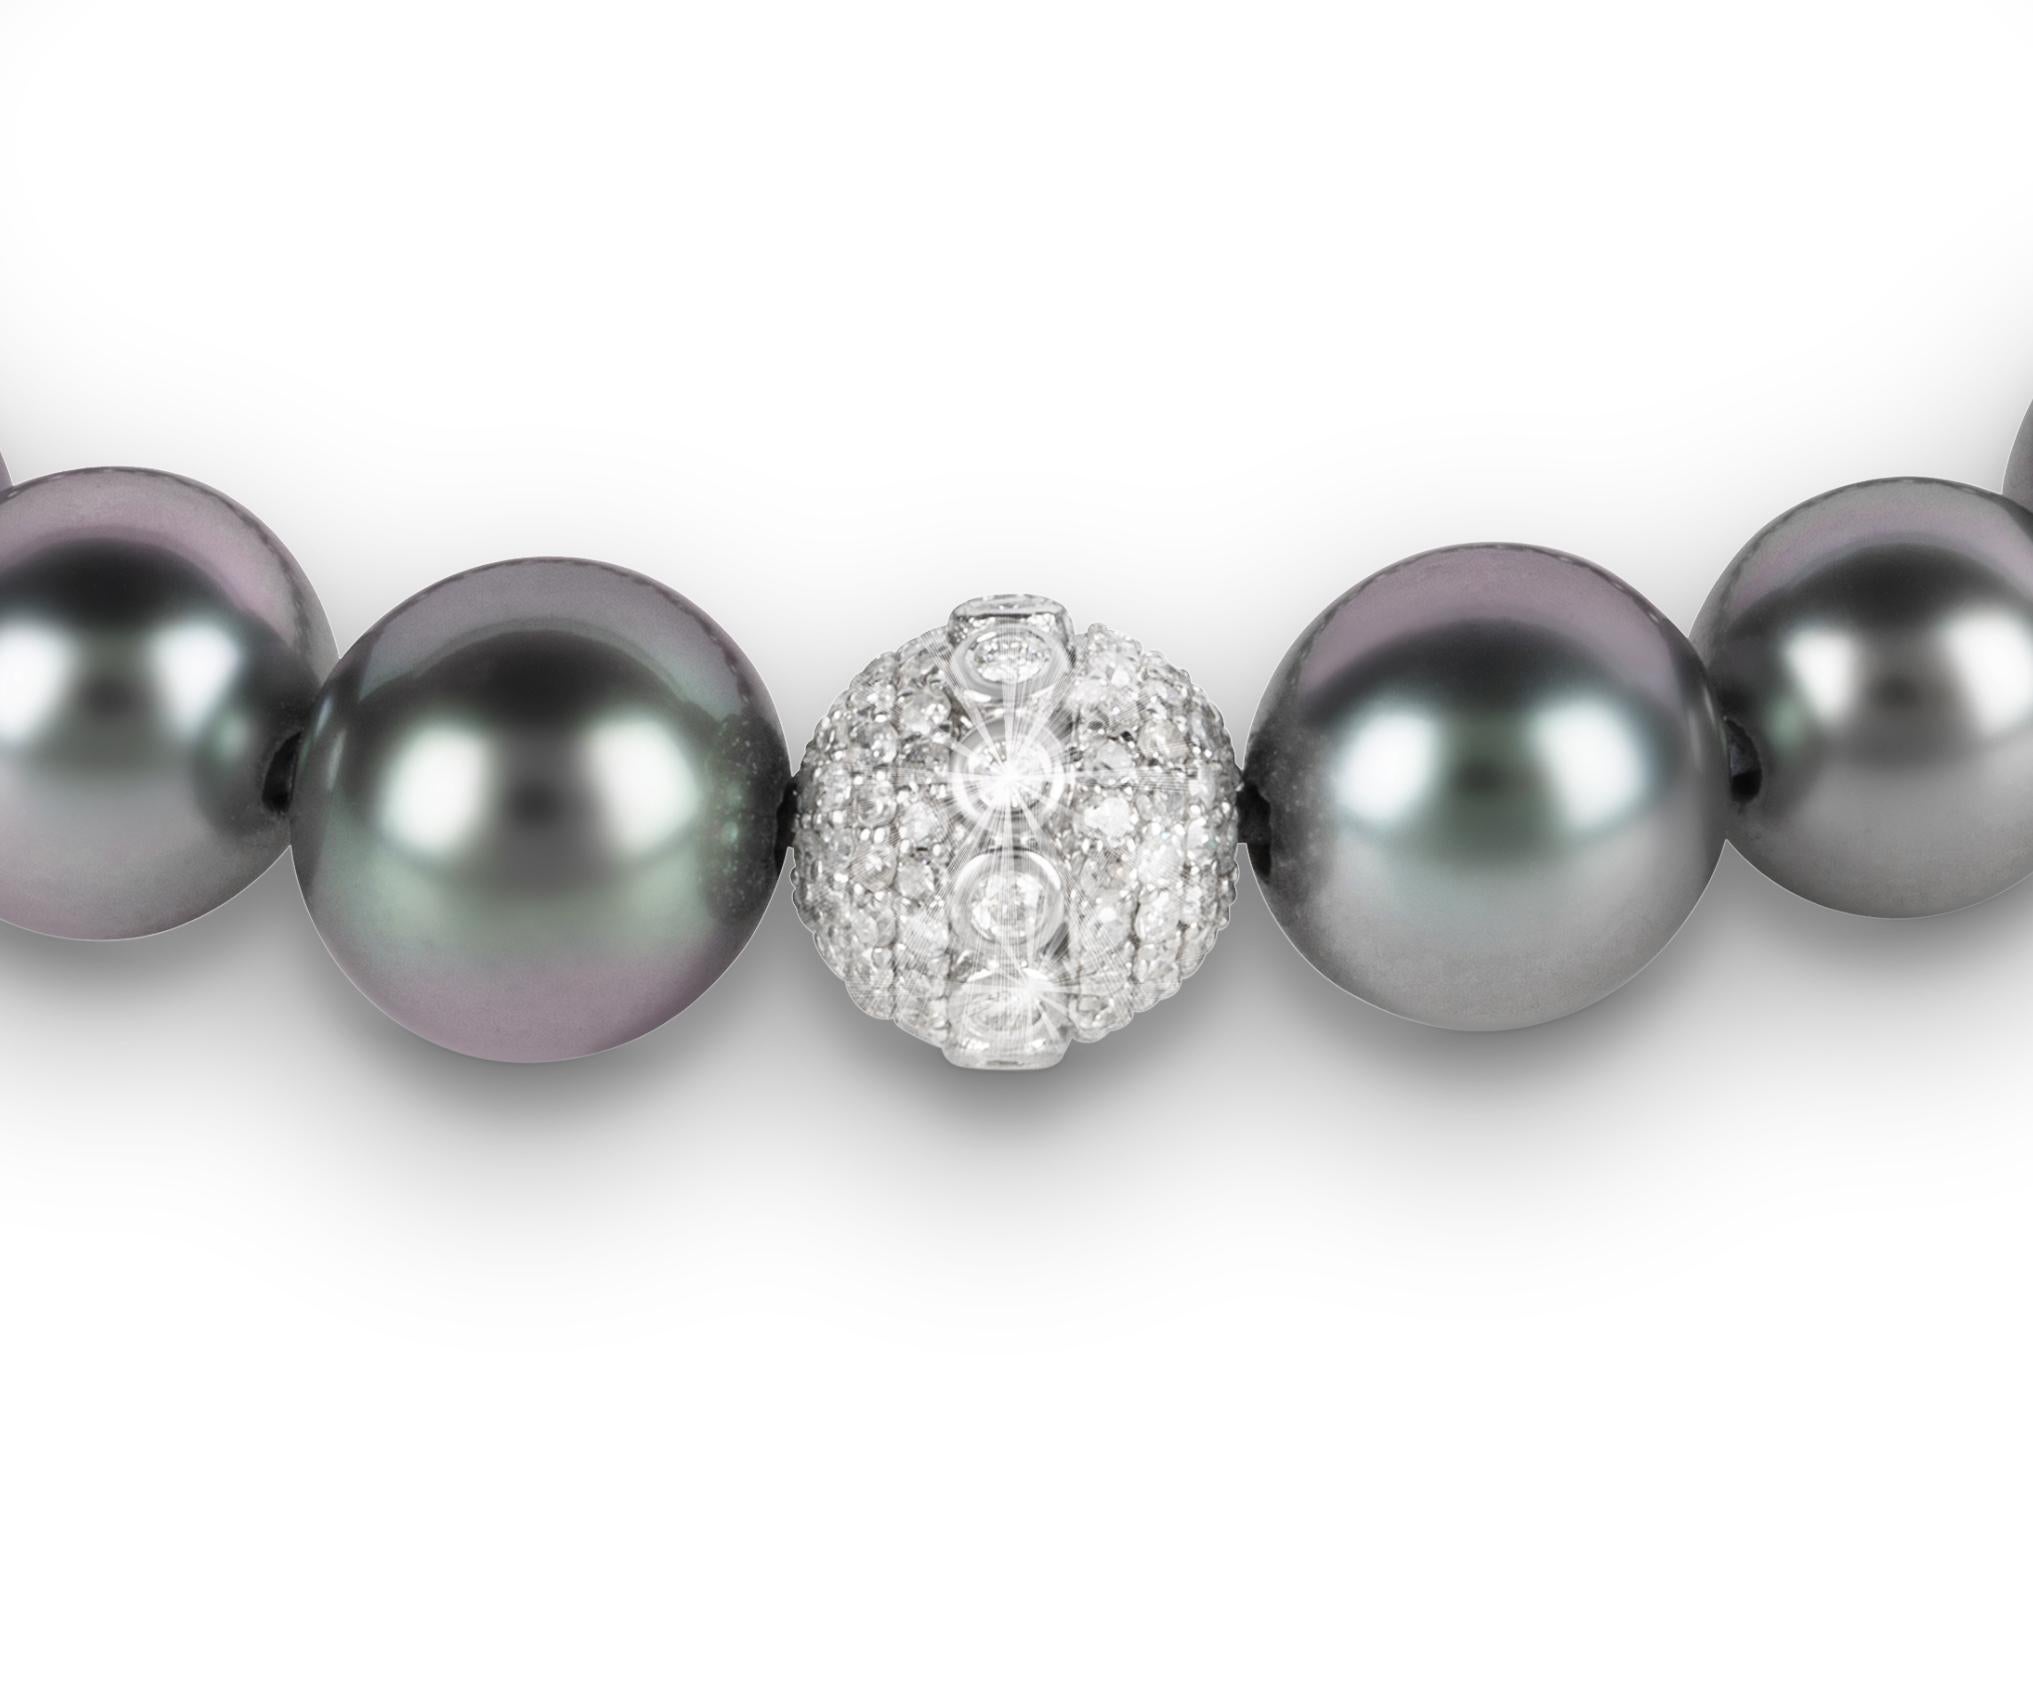 Contemporary Top Grade Tahiti Pearl Bracelet with an 18k White Gold Diamond-Encrusted Orb